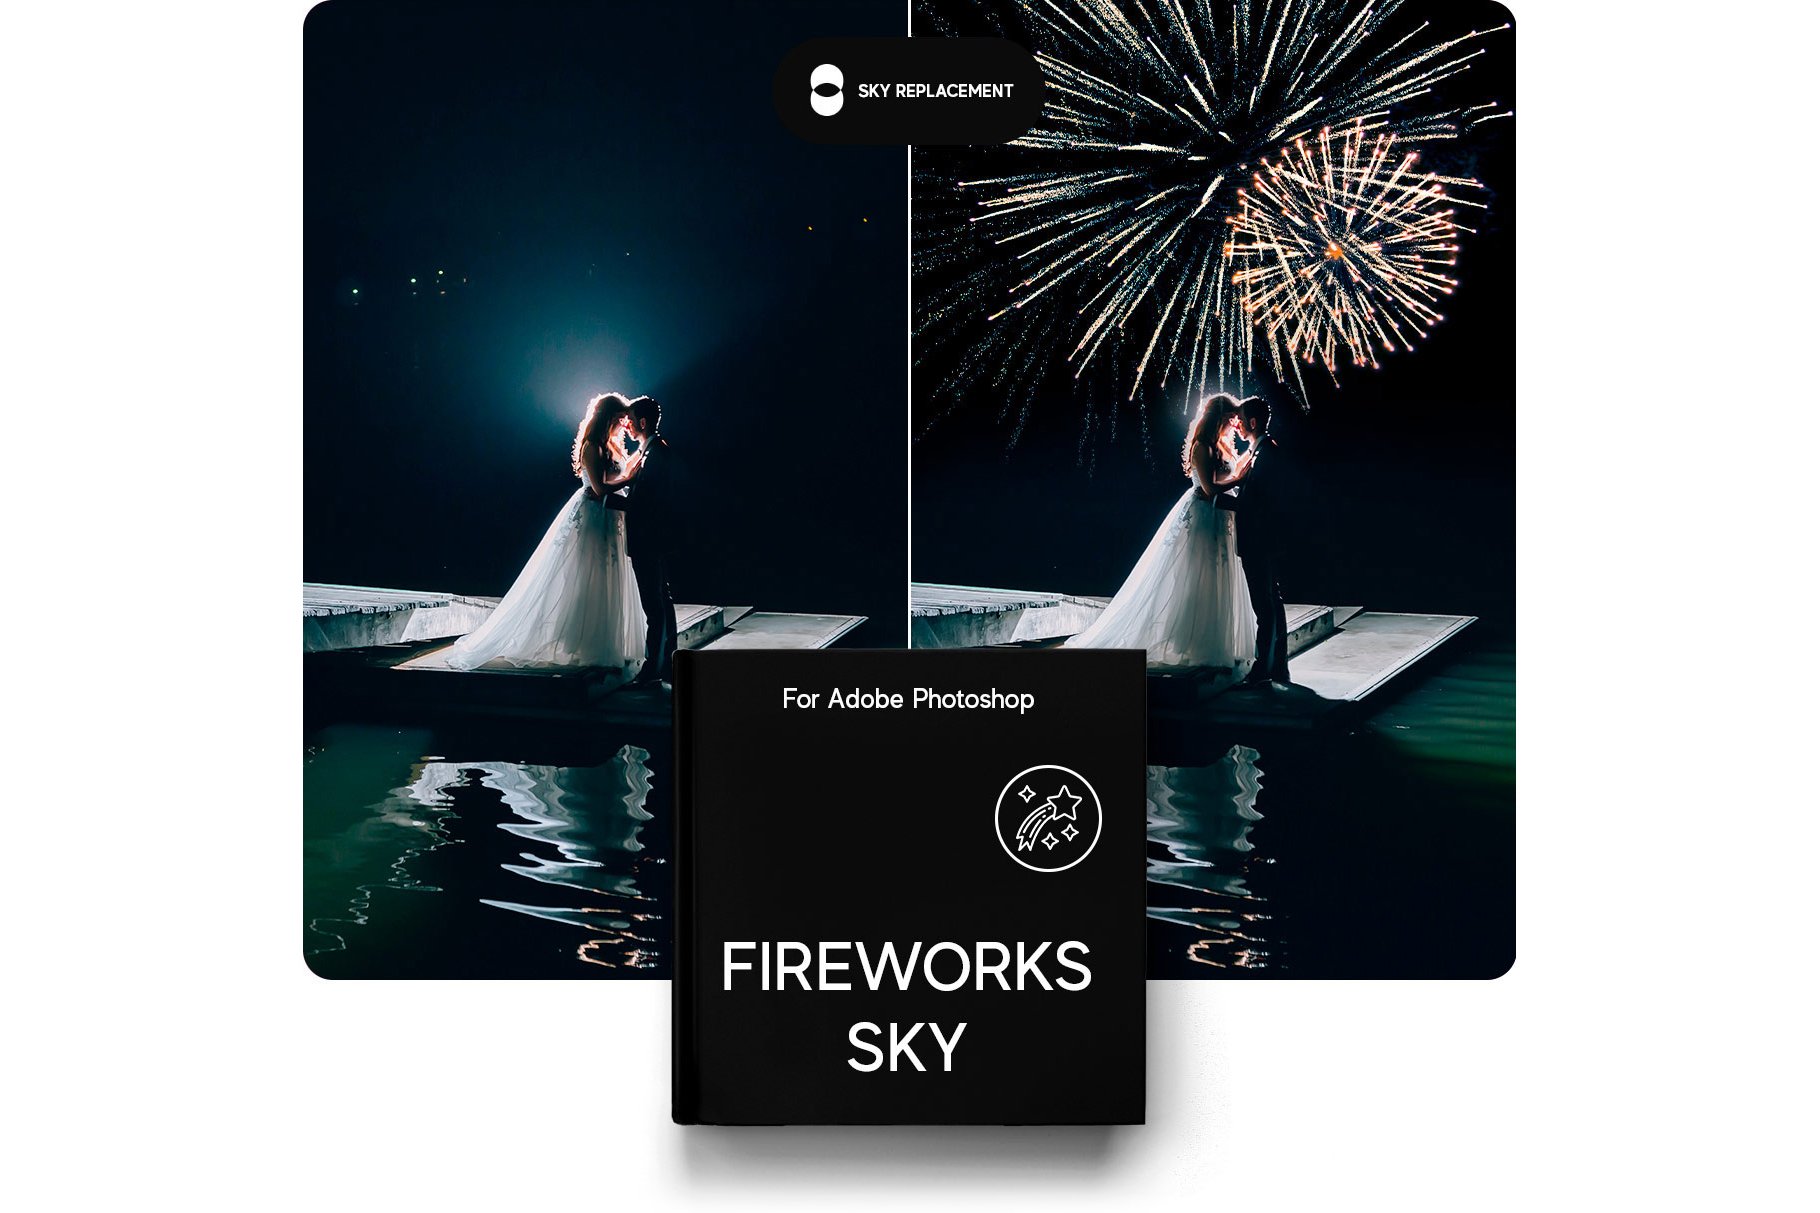 fireworks sky replacement pack 1 357